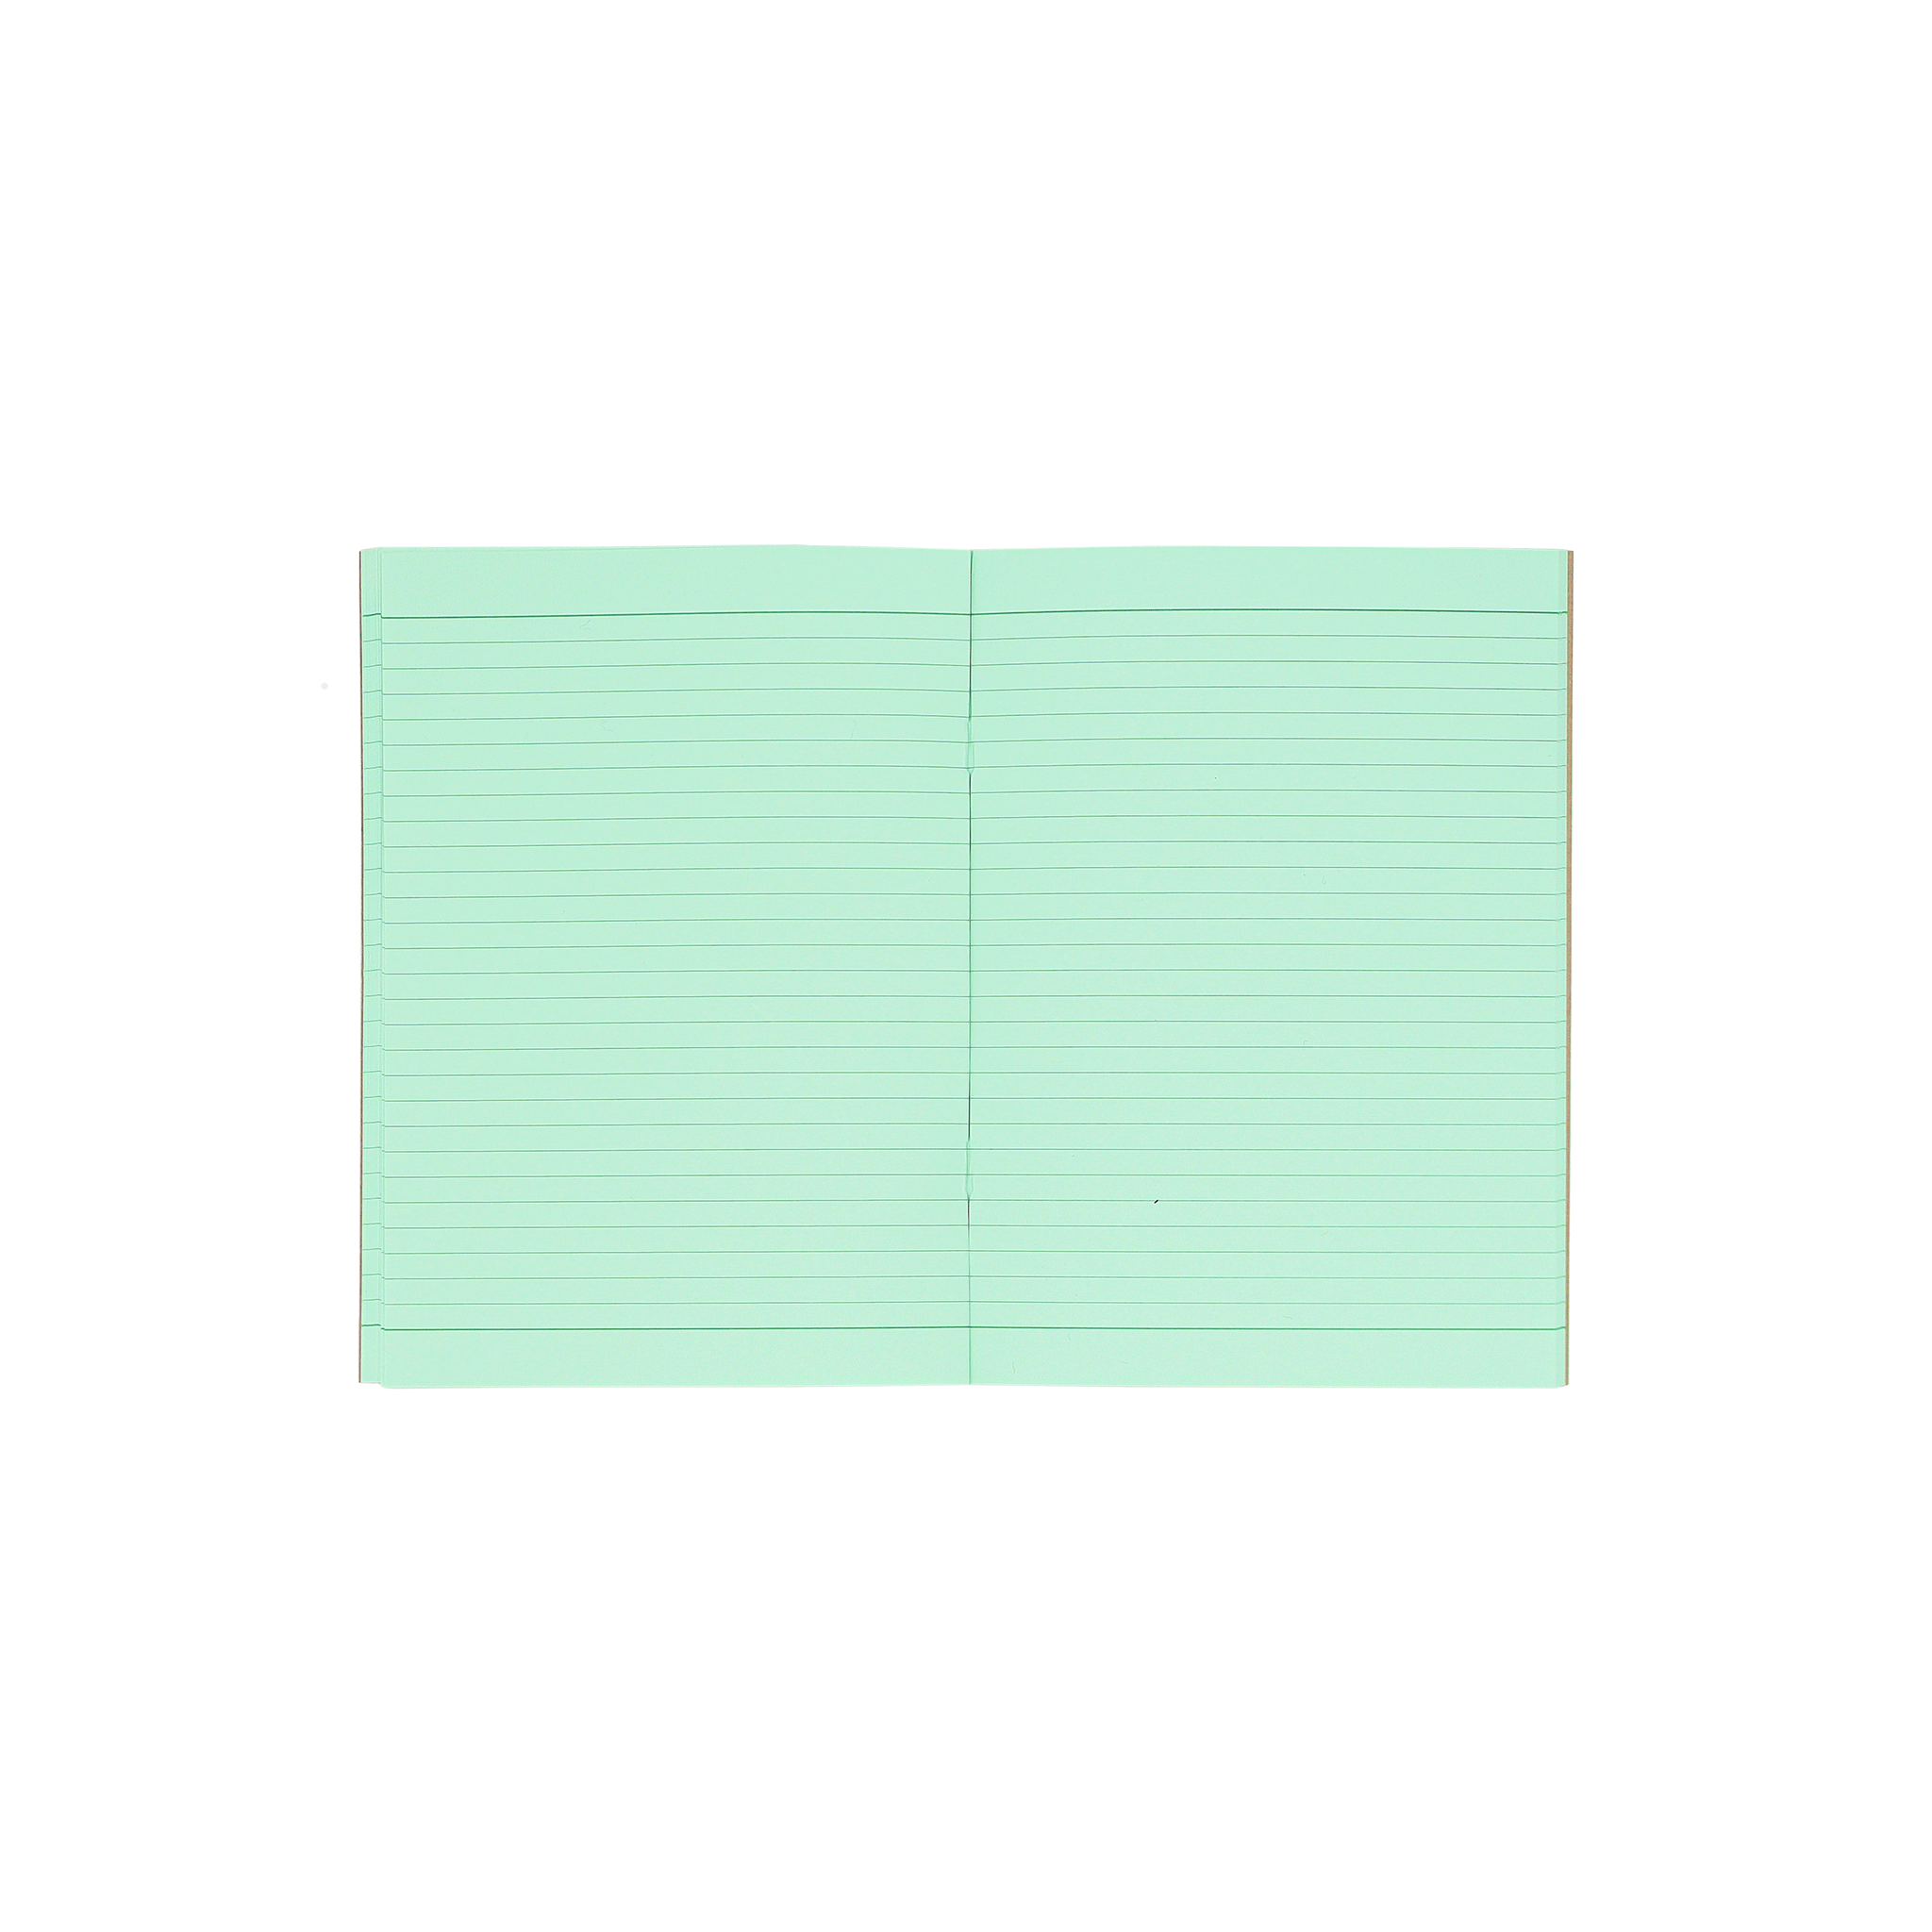 Socolo notebook, open showing its green paper pages, lined with green ink. 